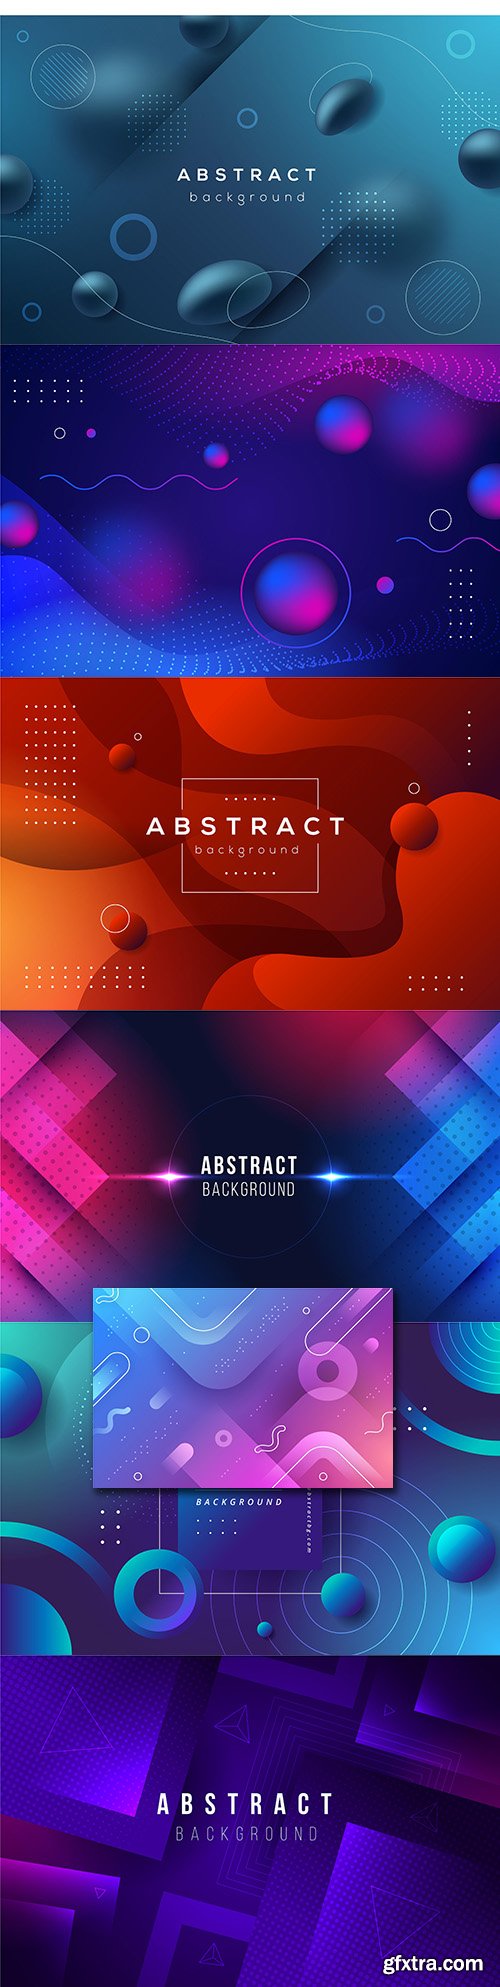 Gradient abstract design geometric background shape
